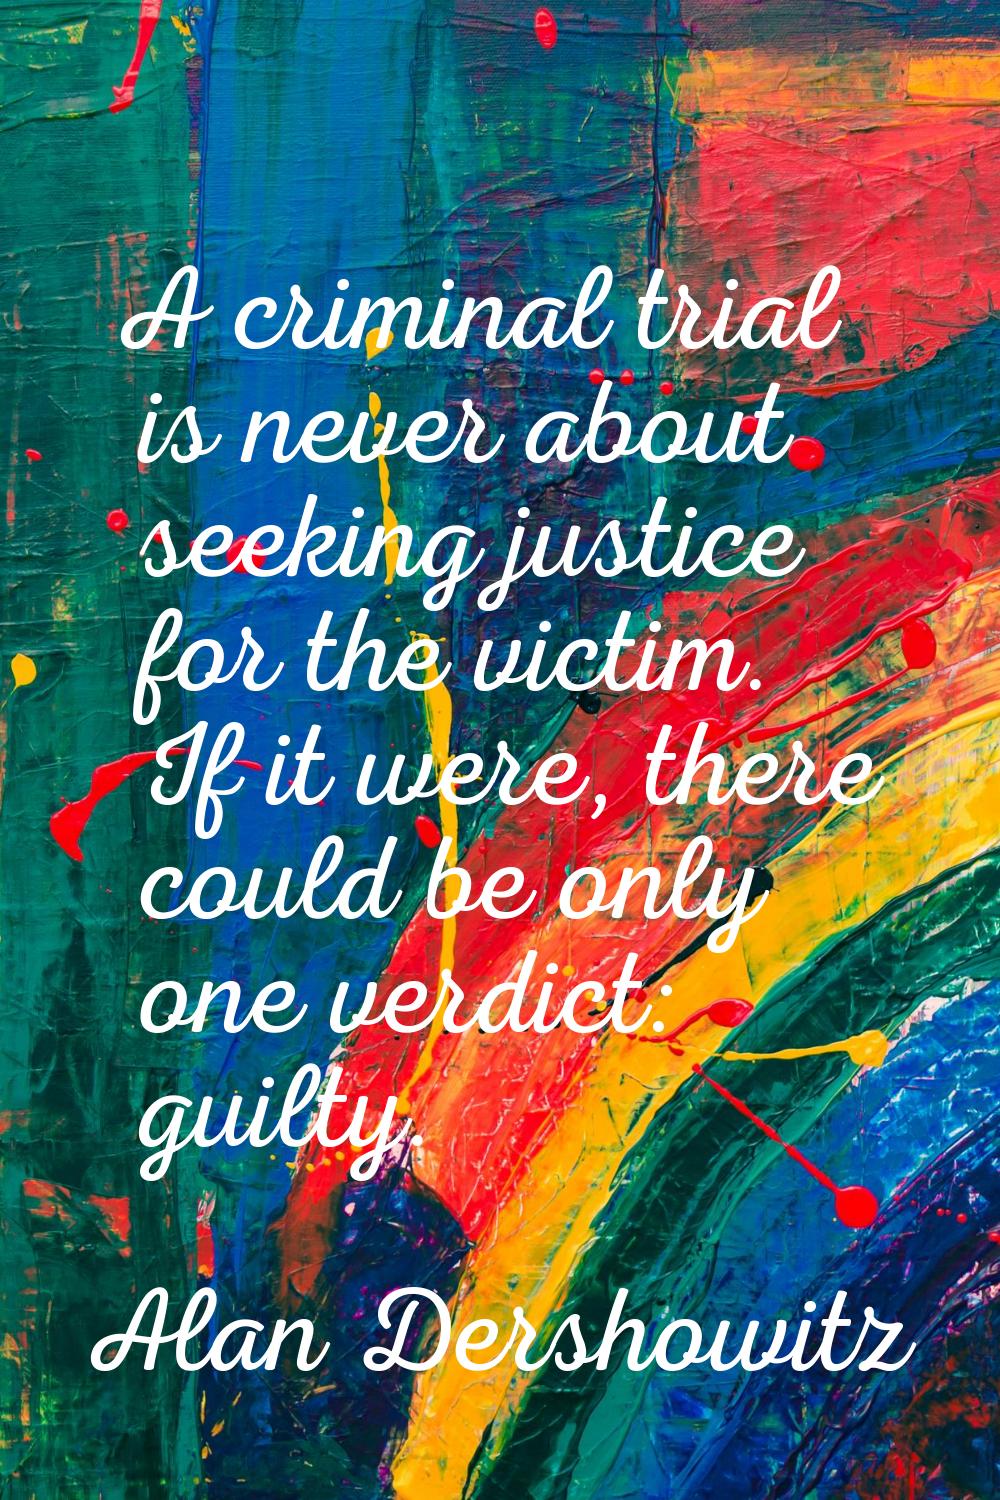 A criminal trial is never about seeking justice for the victim. If it were, there could be only one